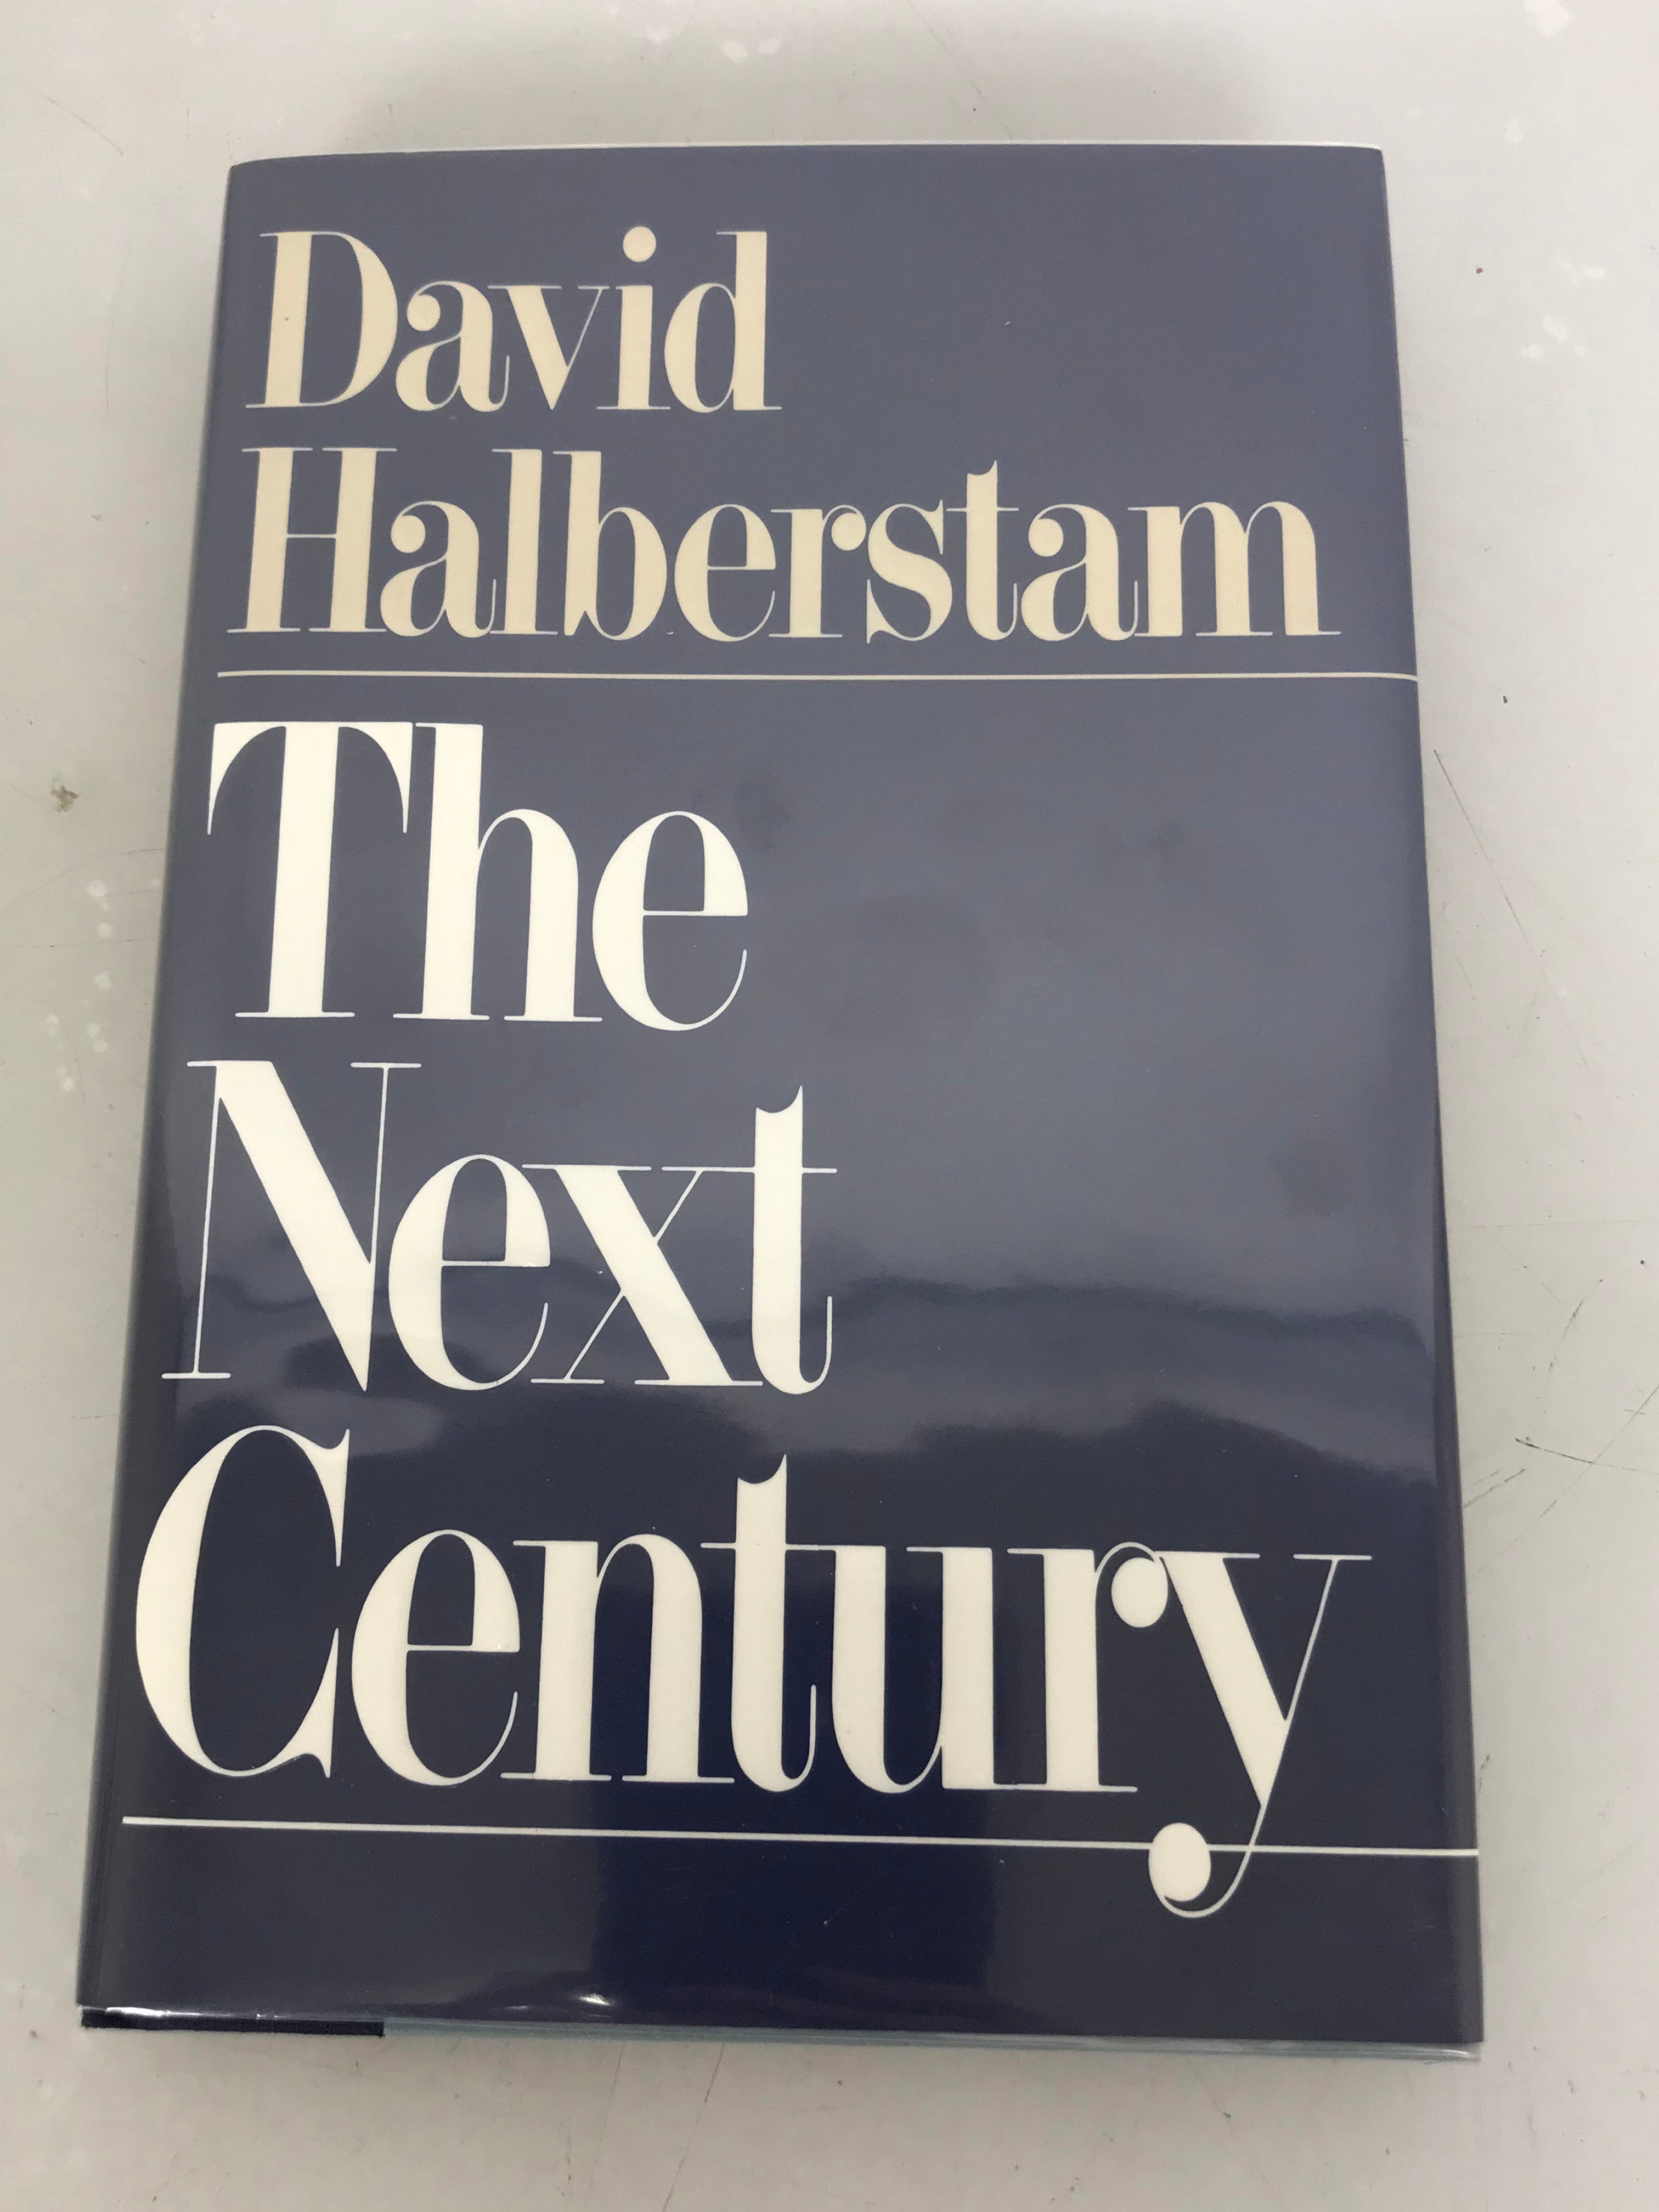 Lot of 7 David Halberstam Books Including First Editions and Signed Copies HC DJ